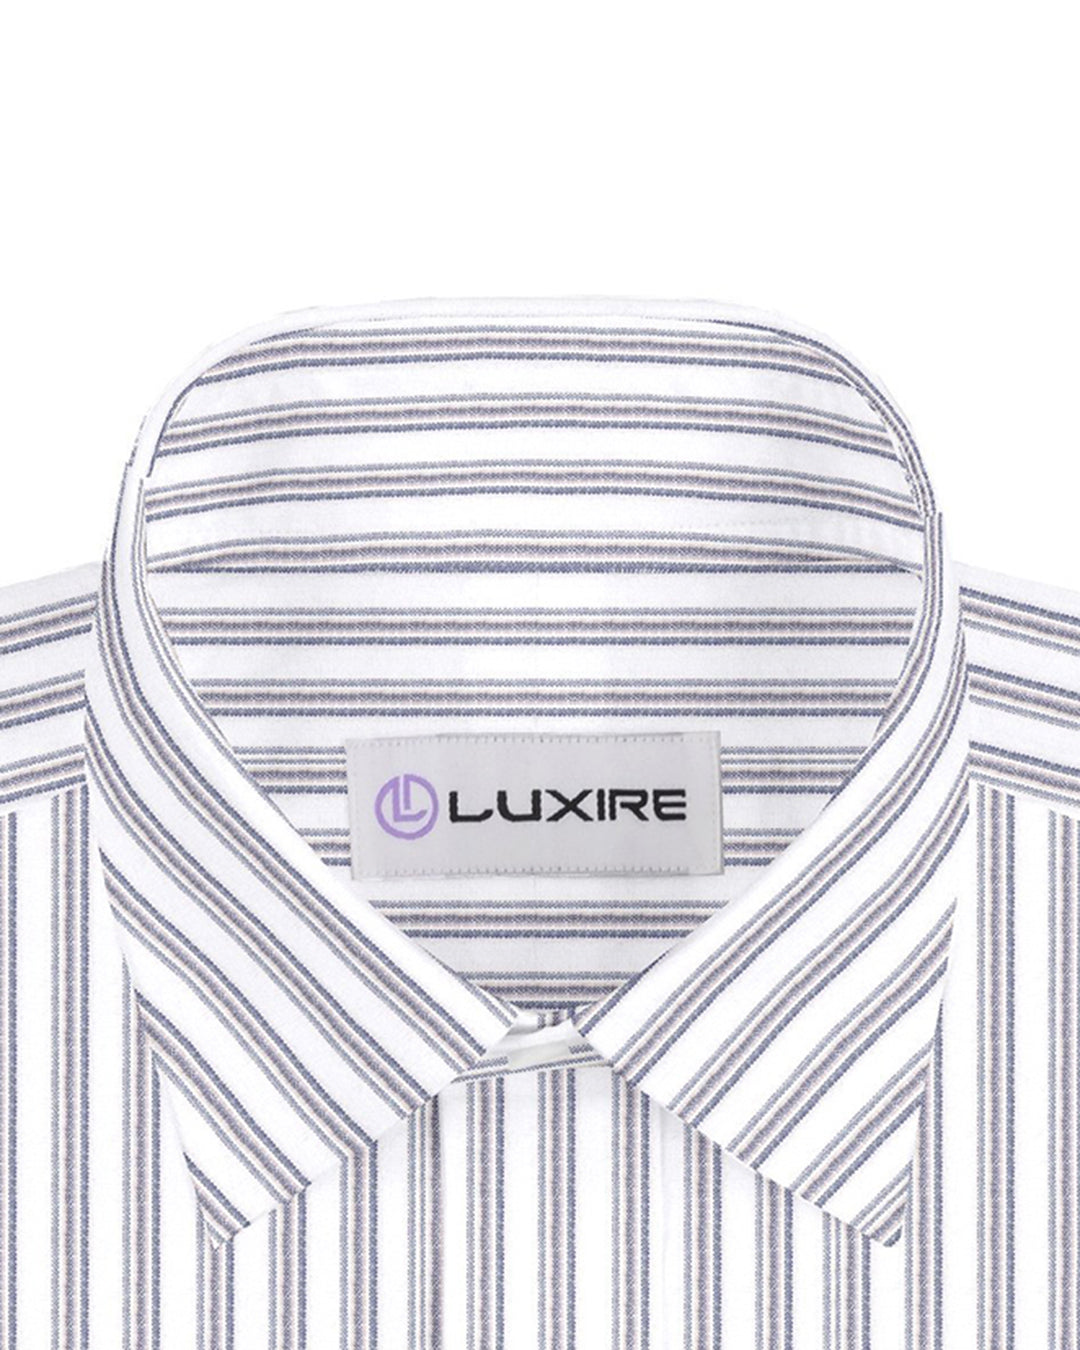 Collar of the custom linen shirt for men in dark blue and beige by Luxire Clothing